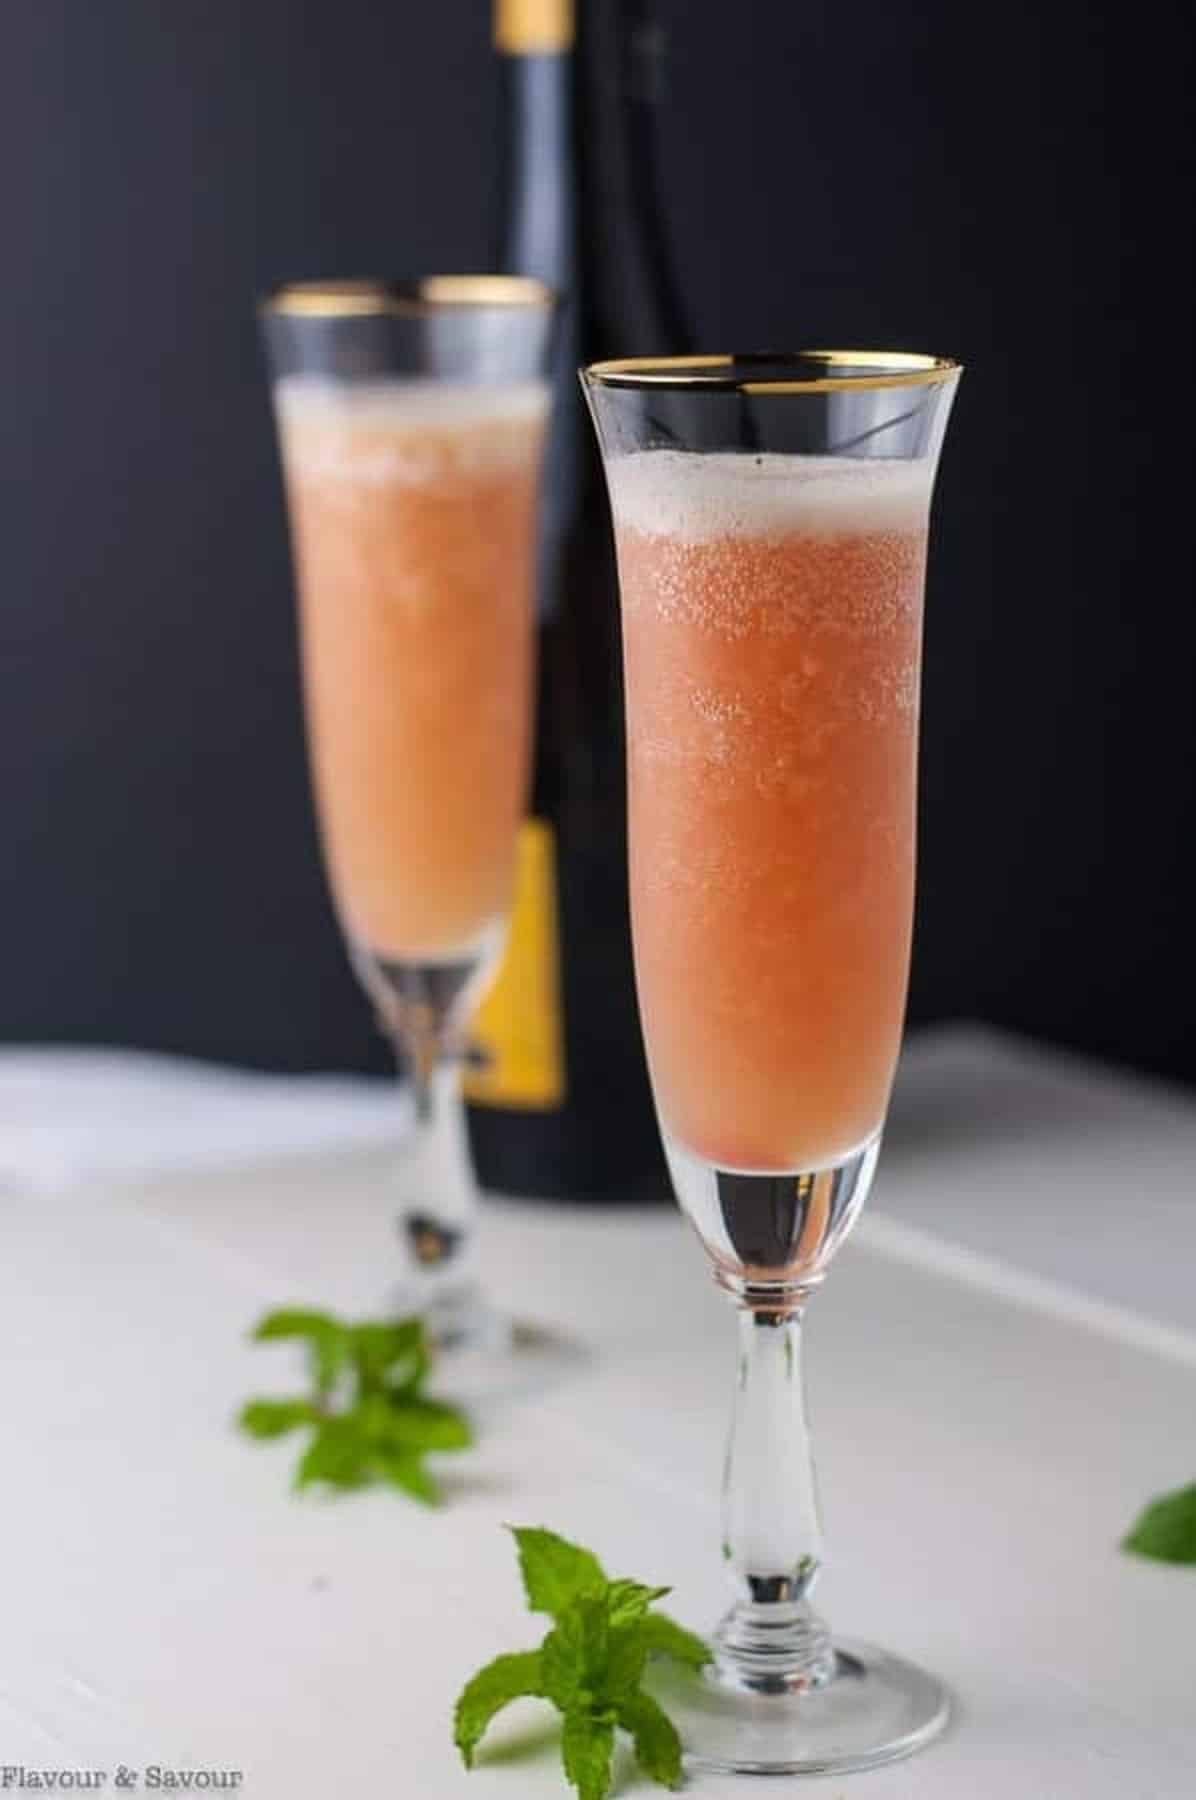 Rhubarb Bellini with Prosecco served in champagne glasses.